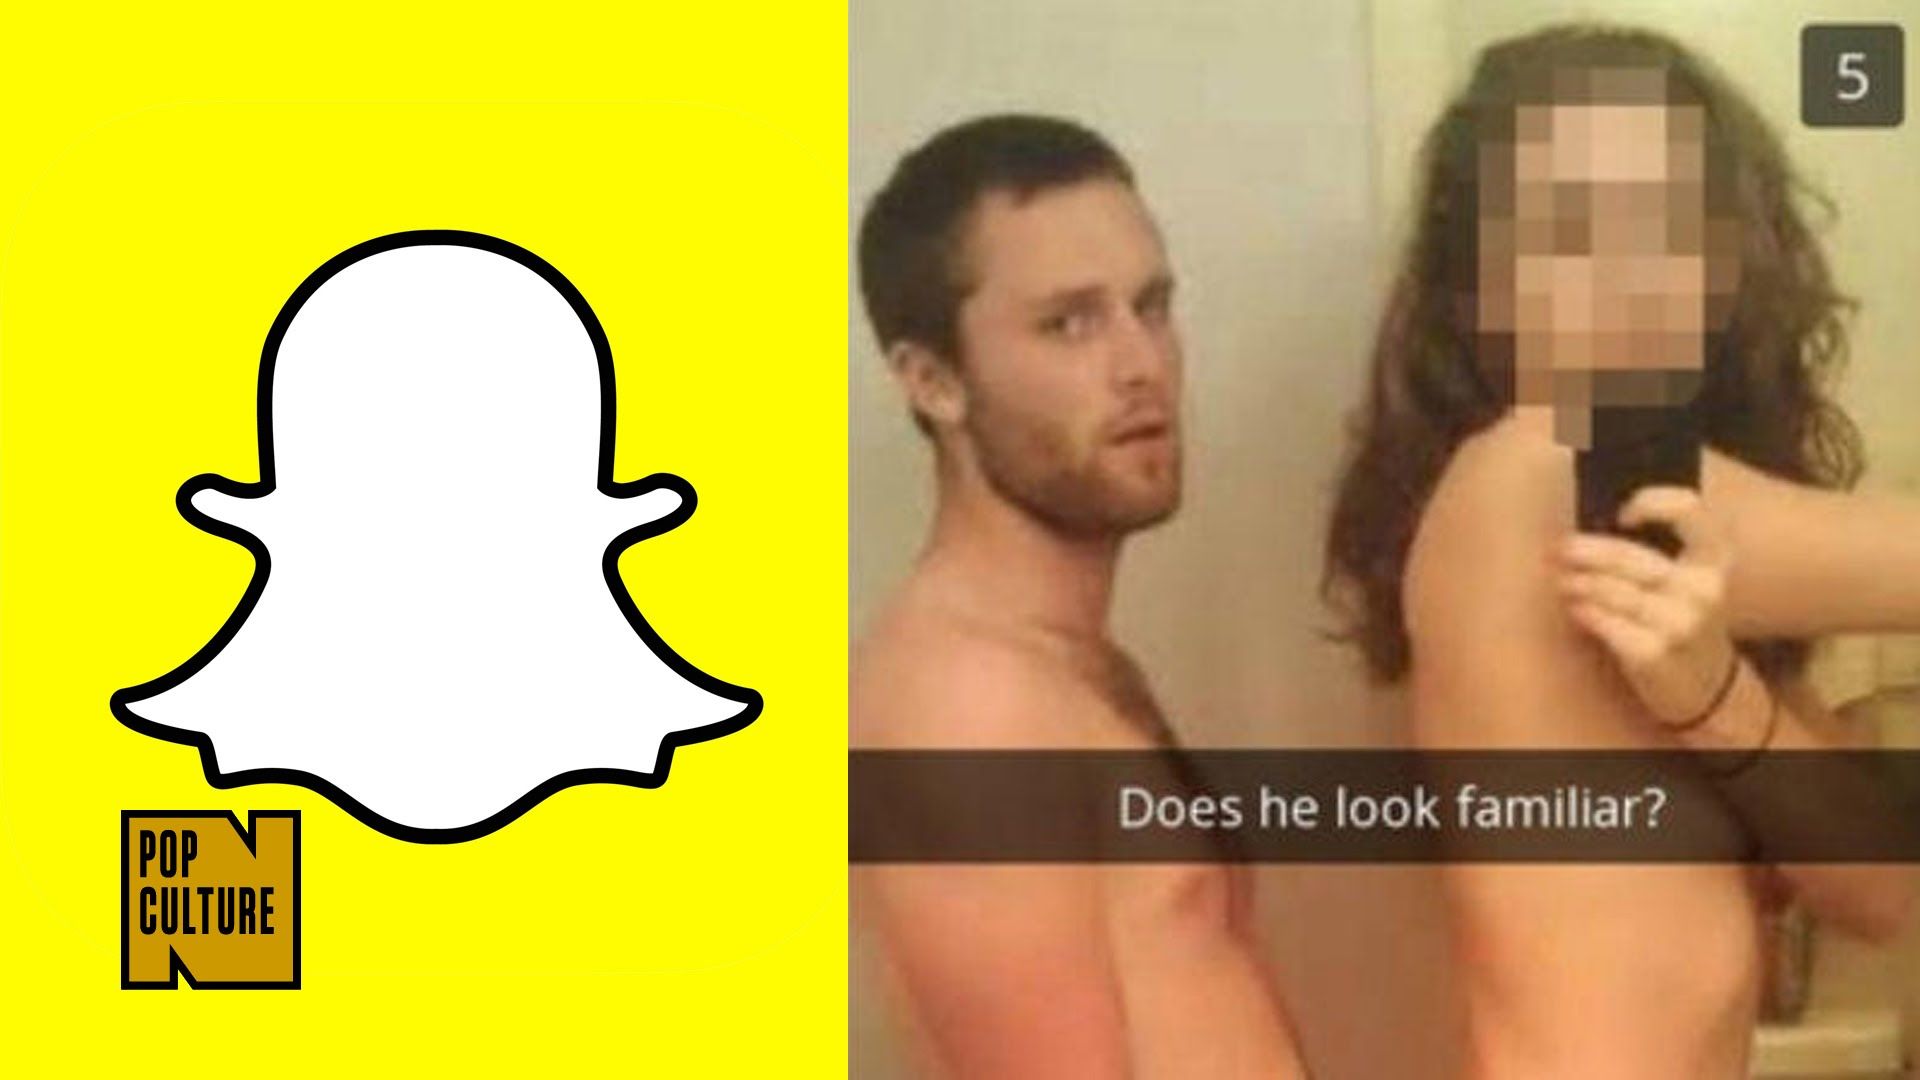 anthony pirrung recommends snap accounts that send nudes pic